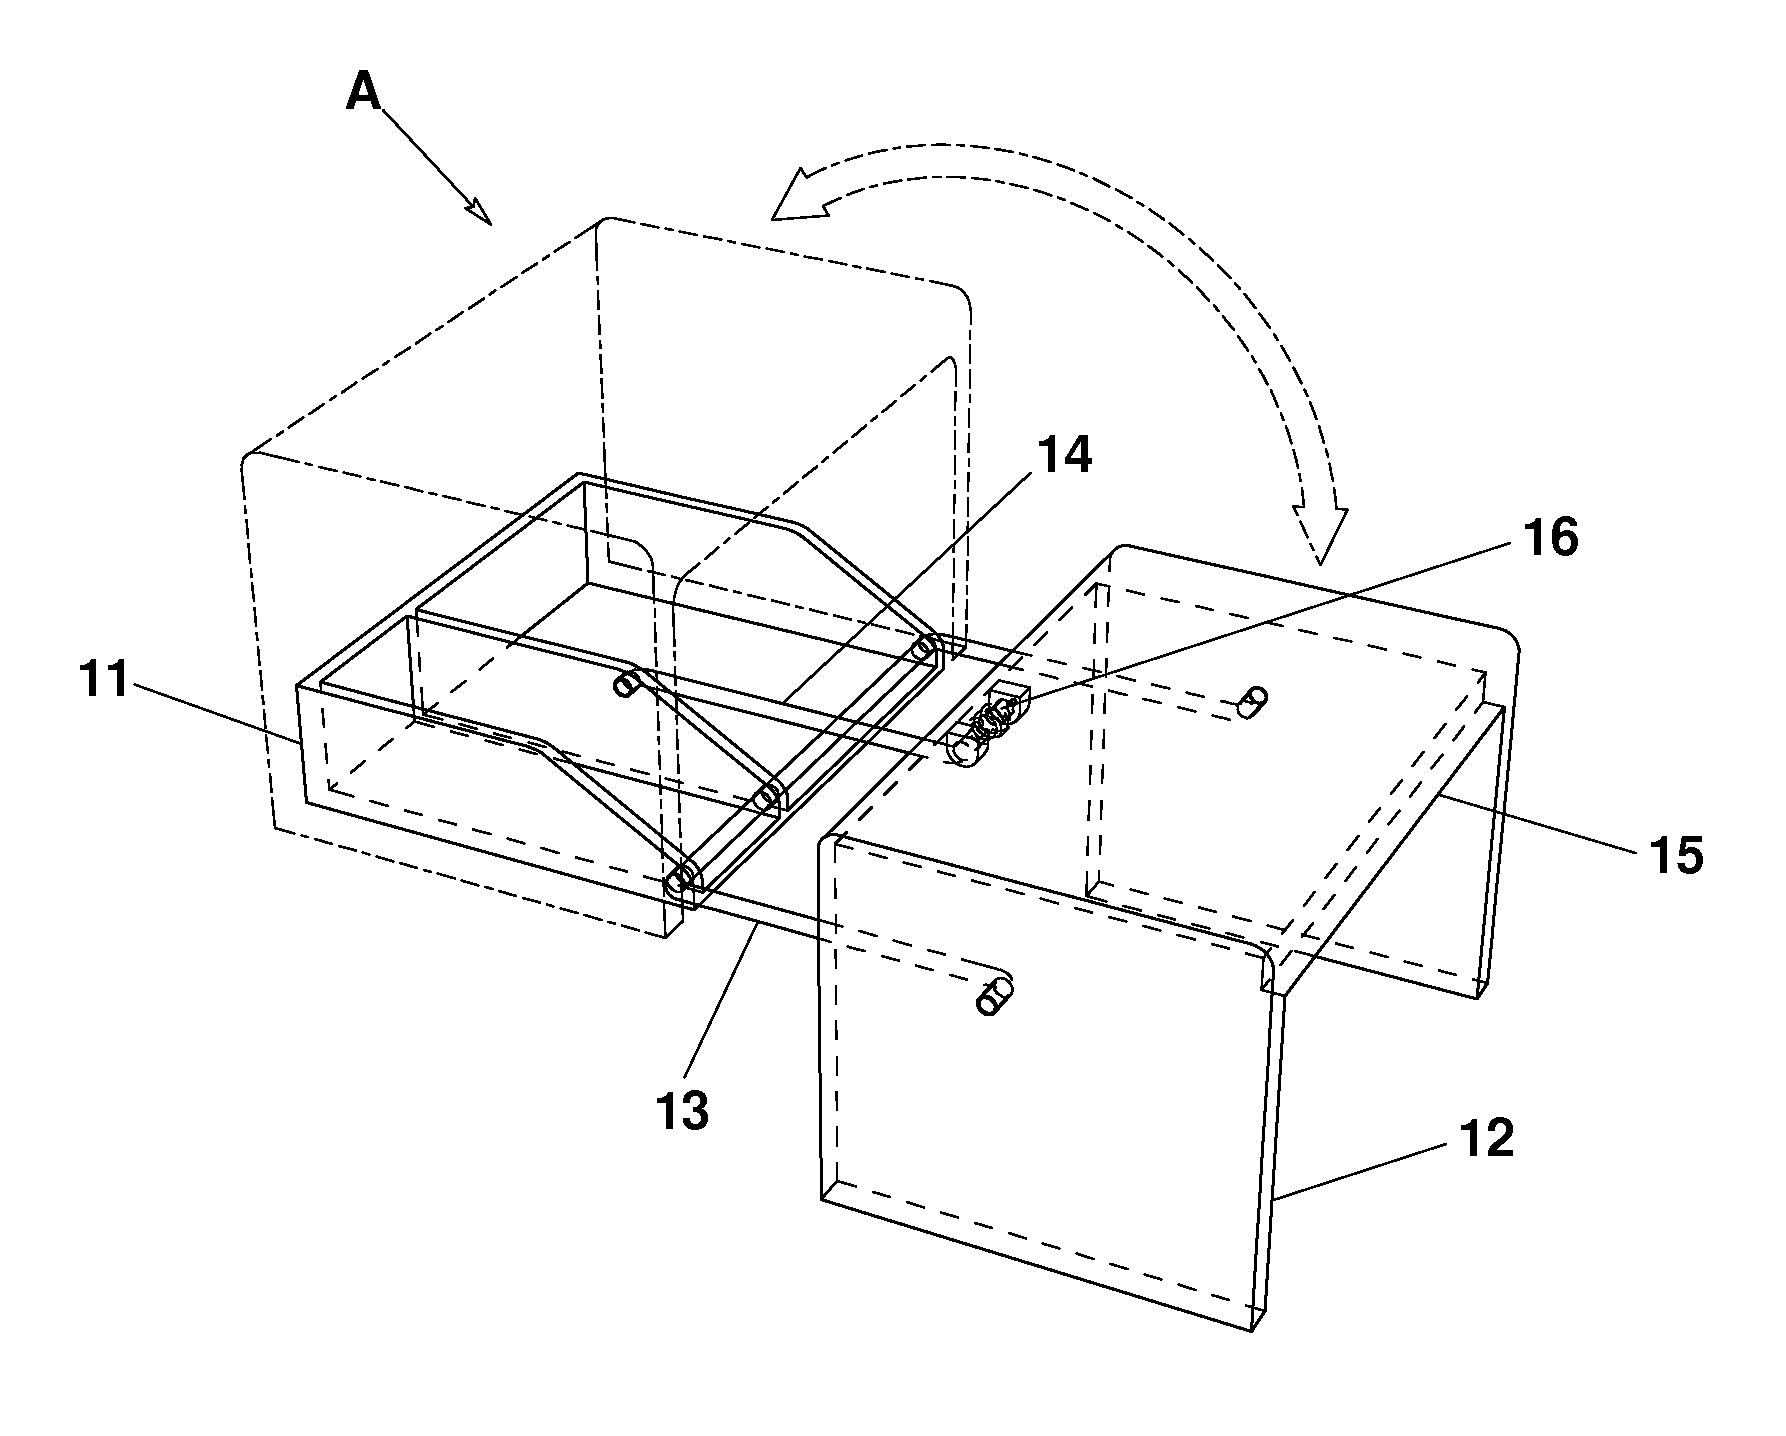 Retractable step stool/ access device